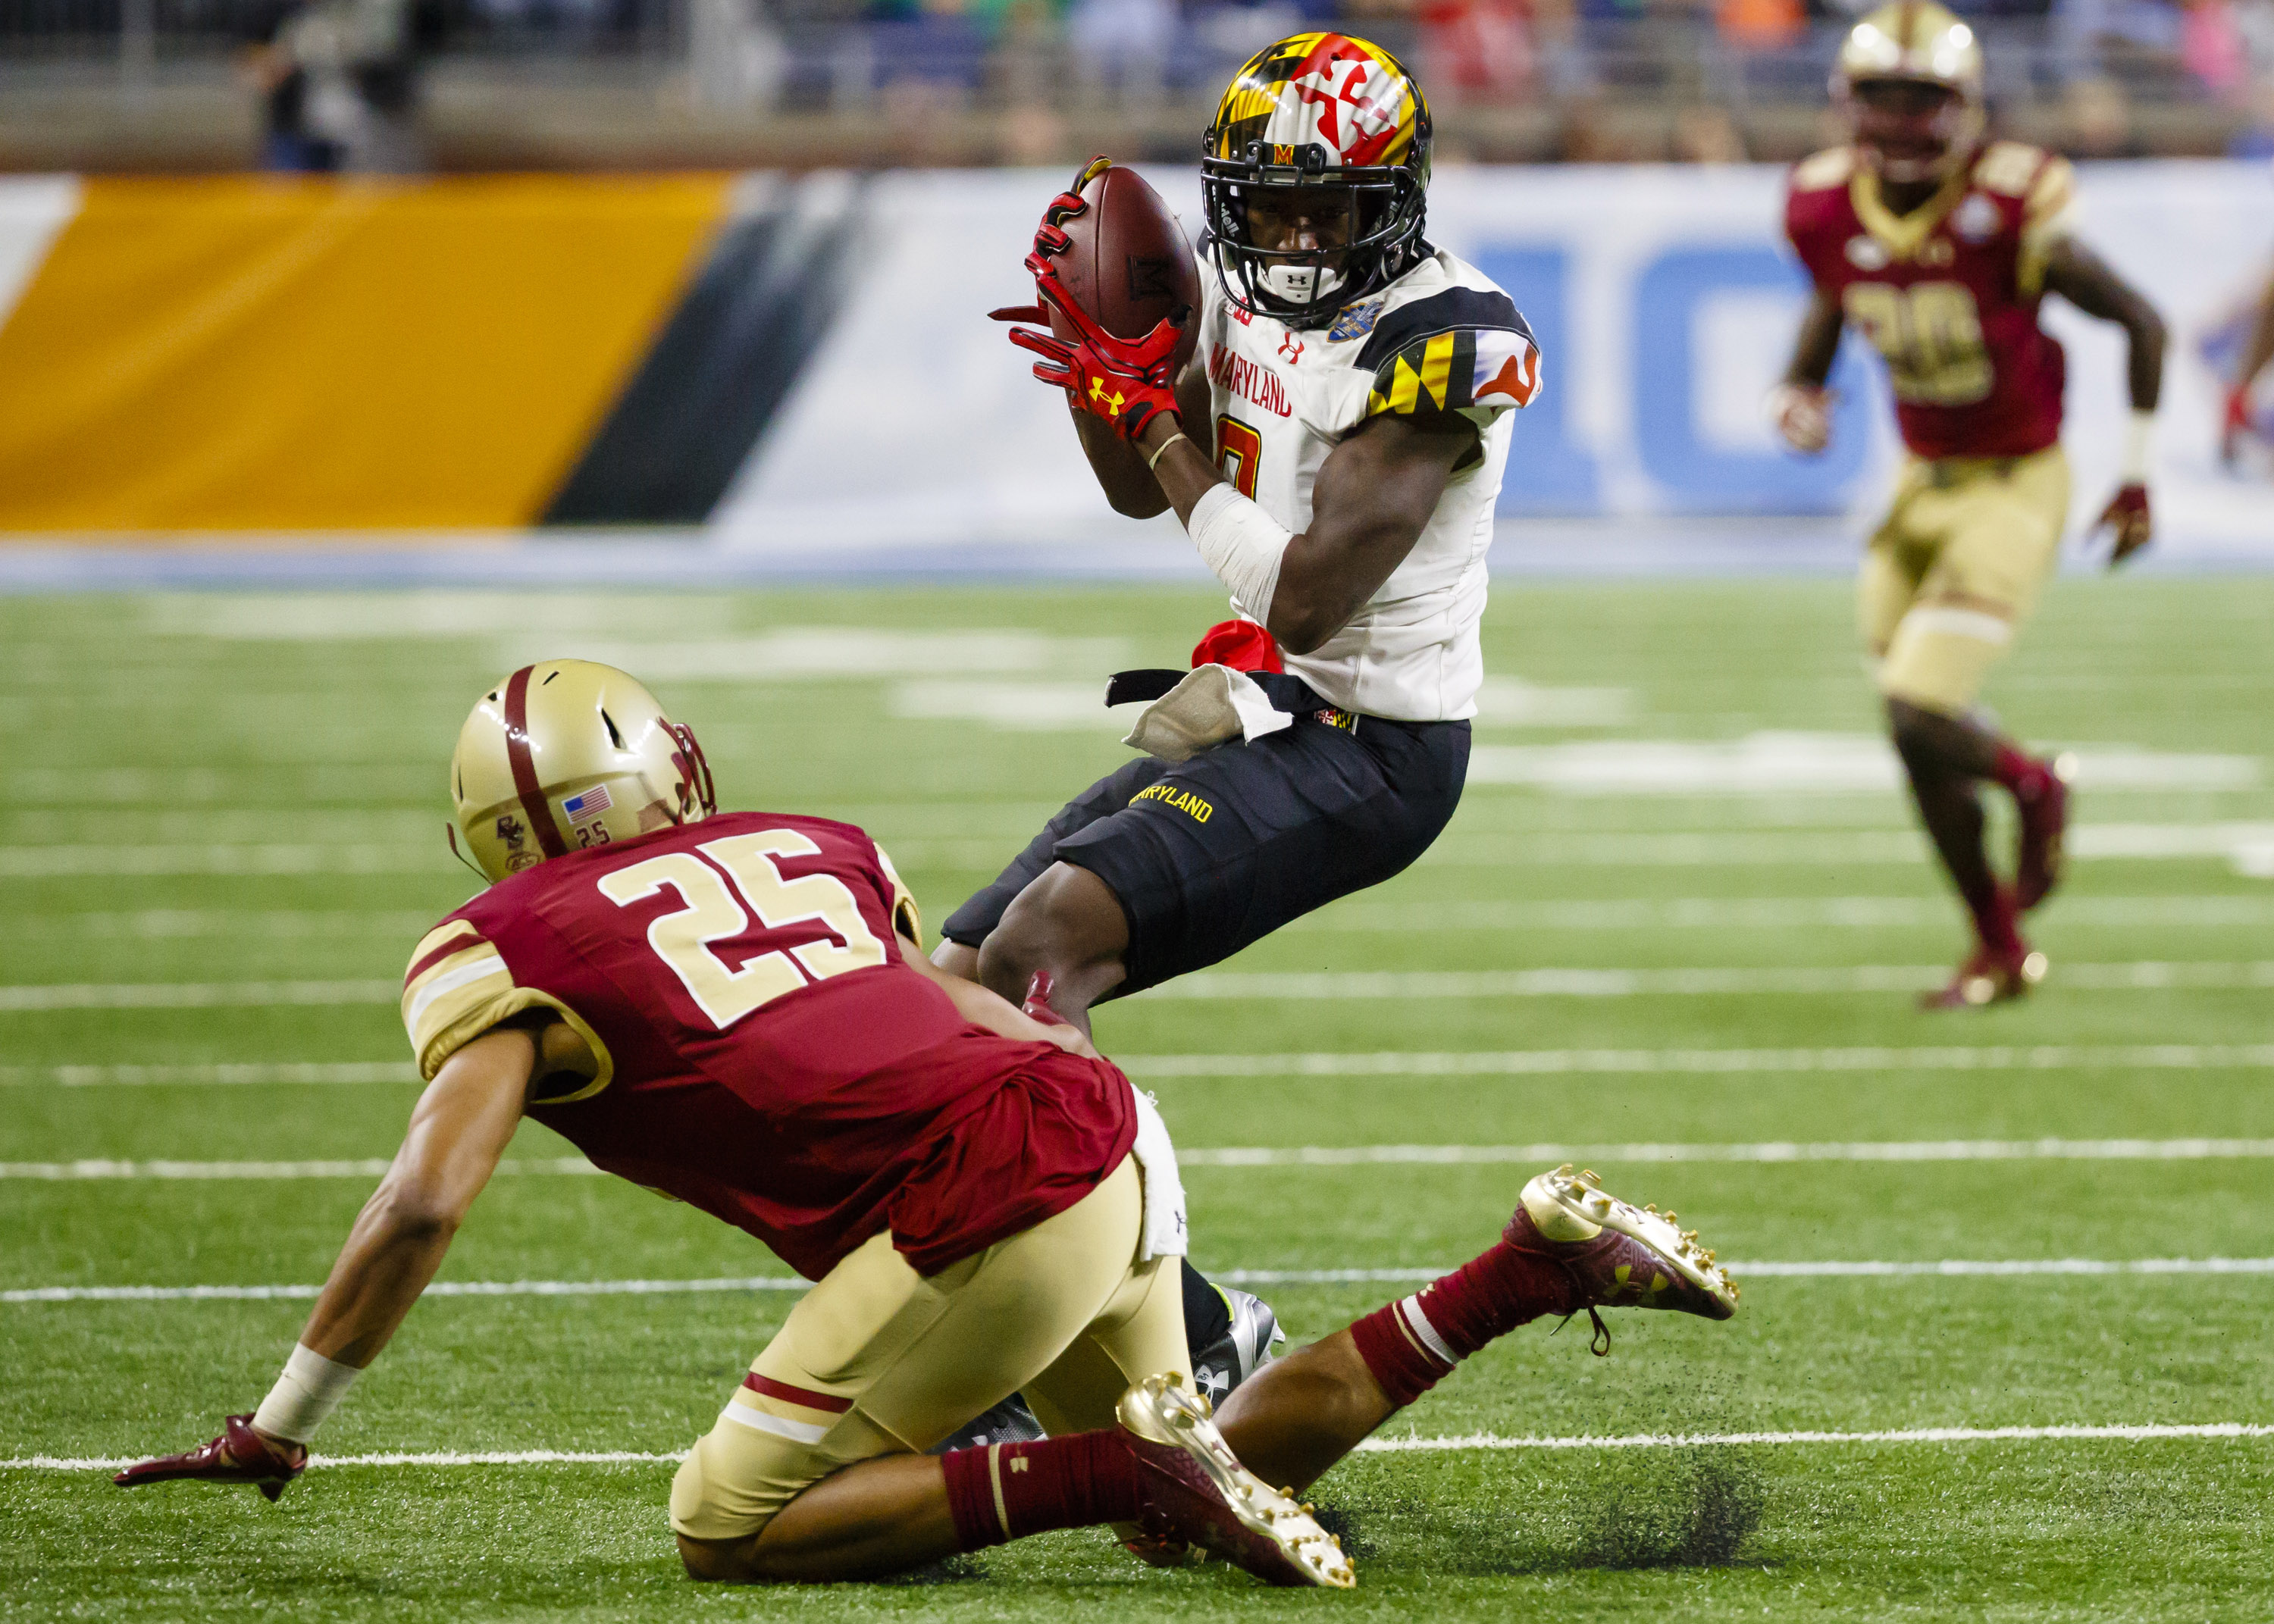 Terps in the NFL: J.C. Jackson is an interception machine - Testudo Times